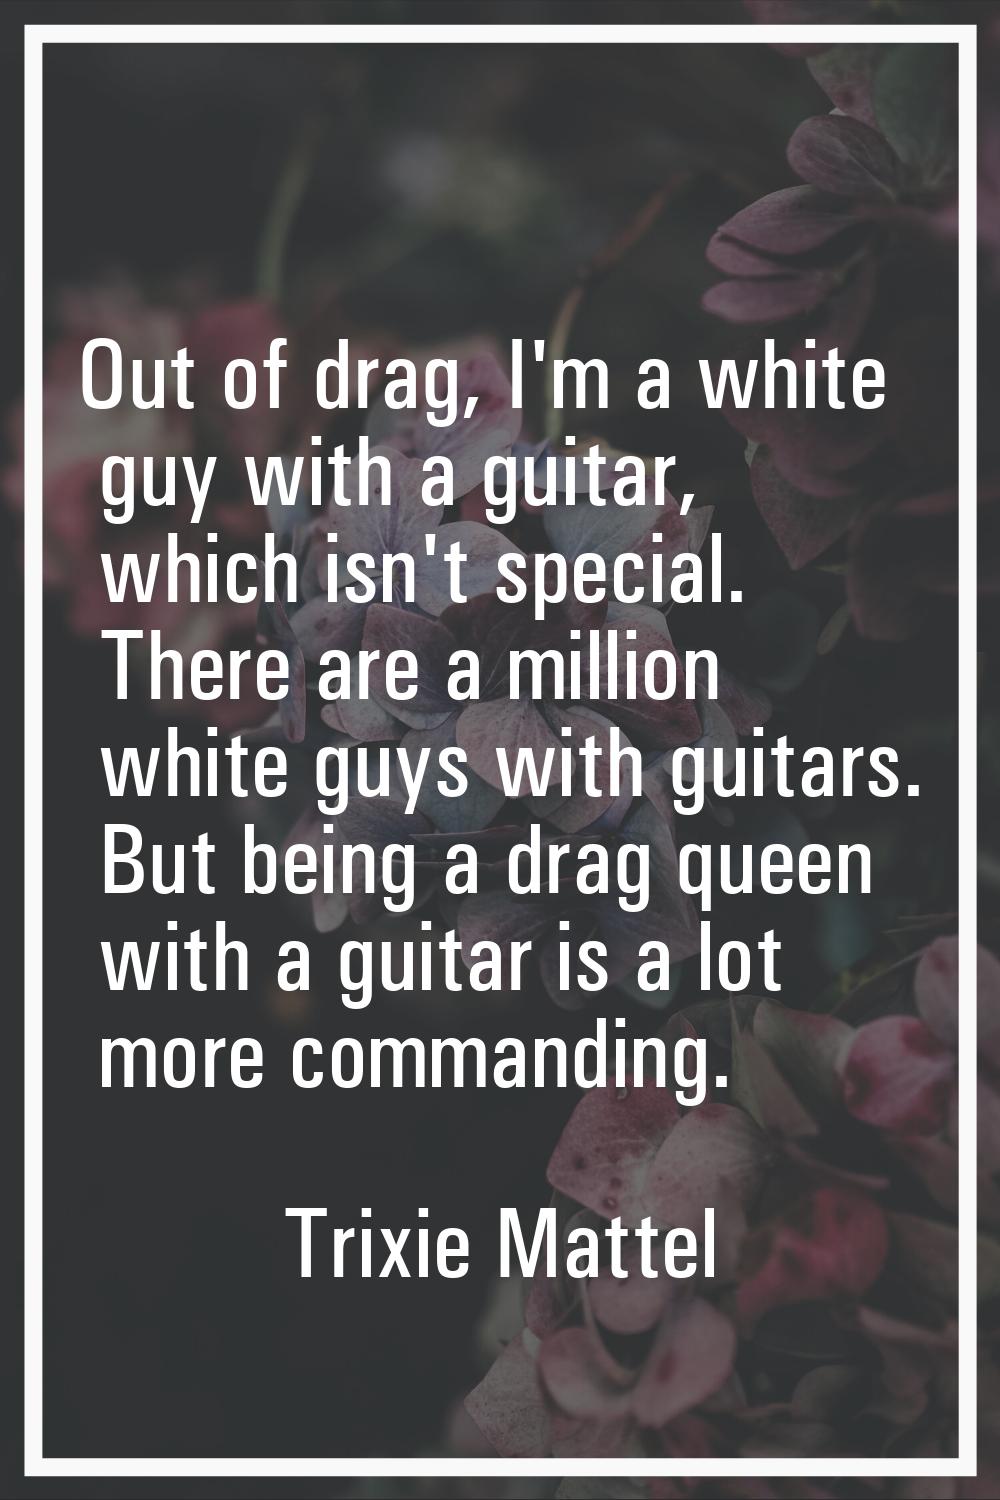 Out of drag, I'm a white guy with a guitar, which isn't special. There are a million white guys wit